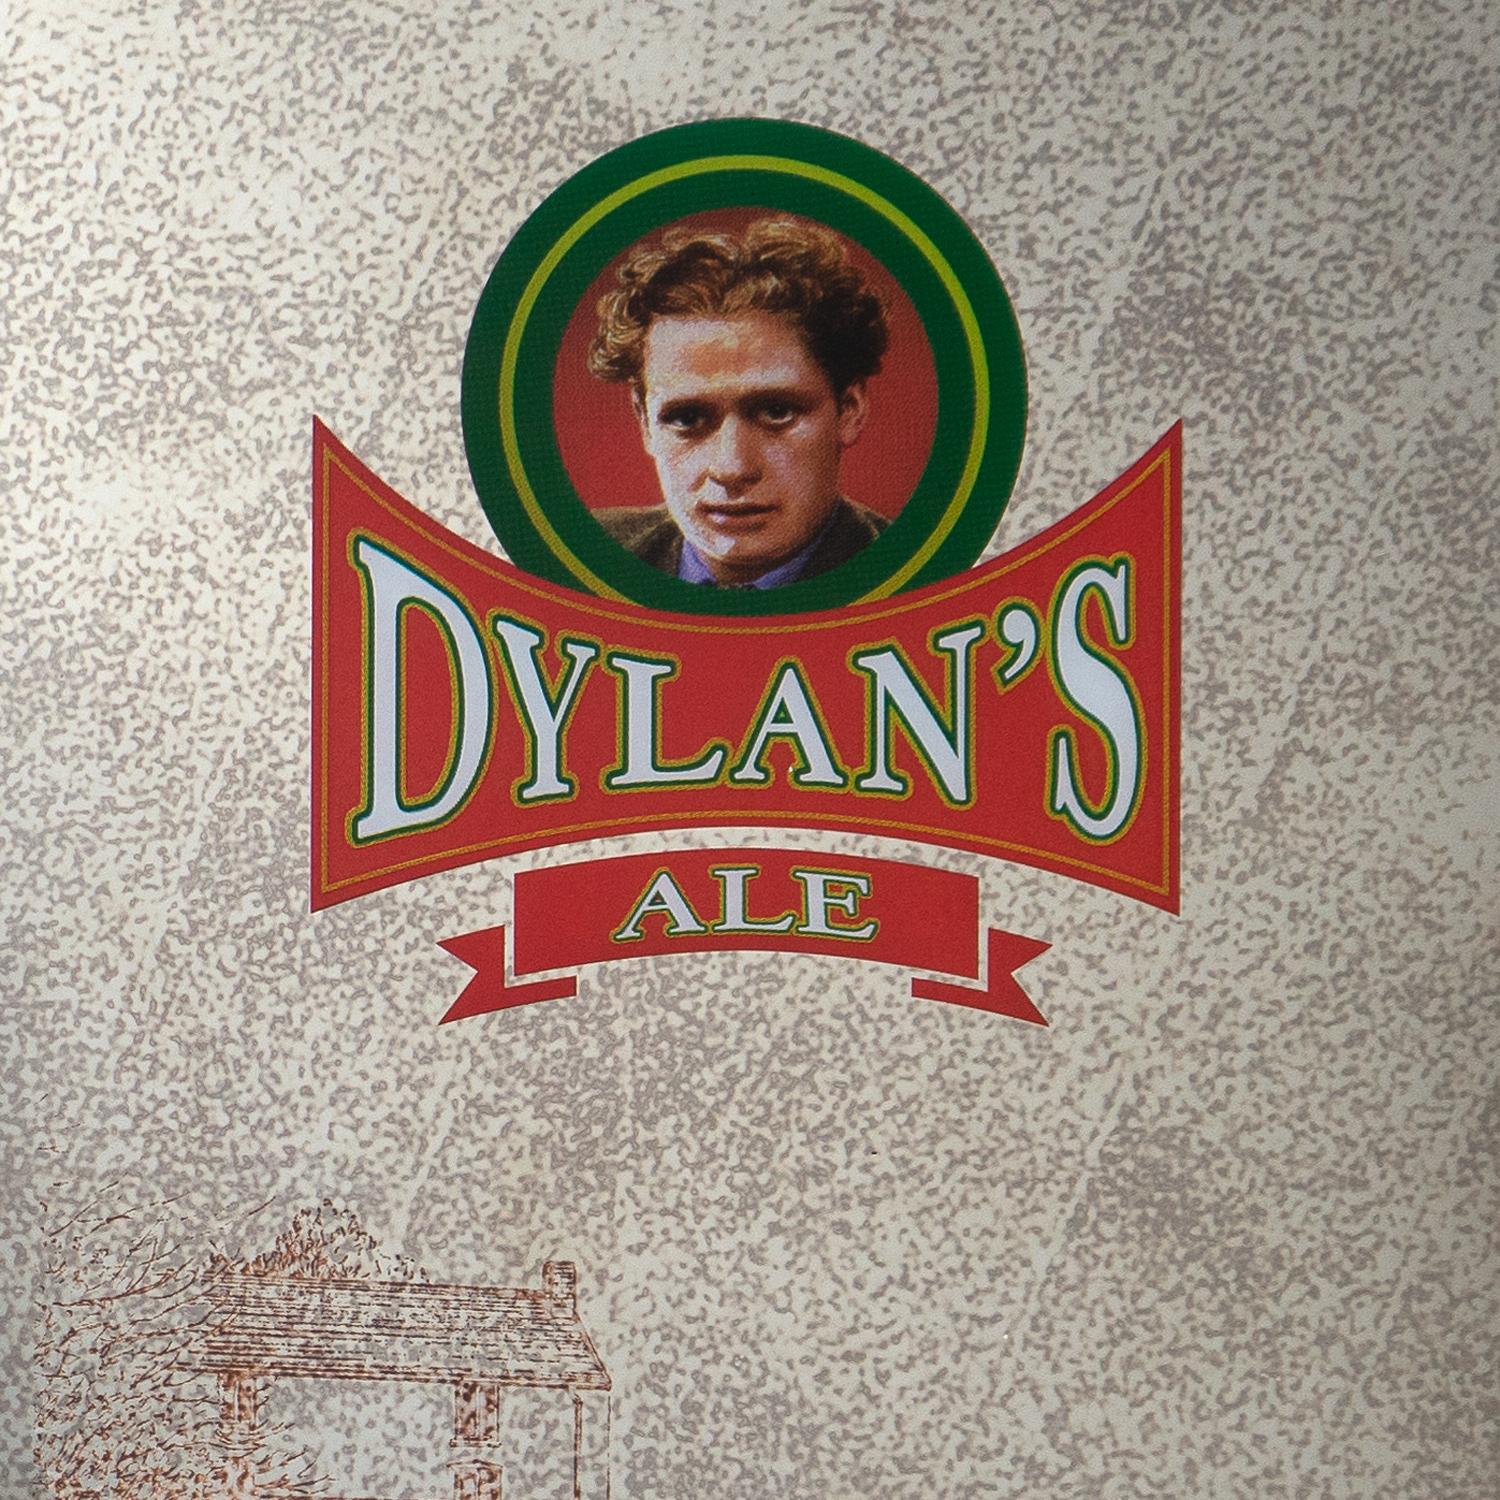 English Dylan Thomas Interest Vintage Dylan's Ale Brains Brewery Advertising Mirror Sign For Sale